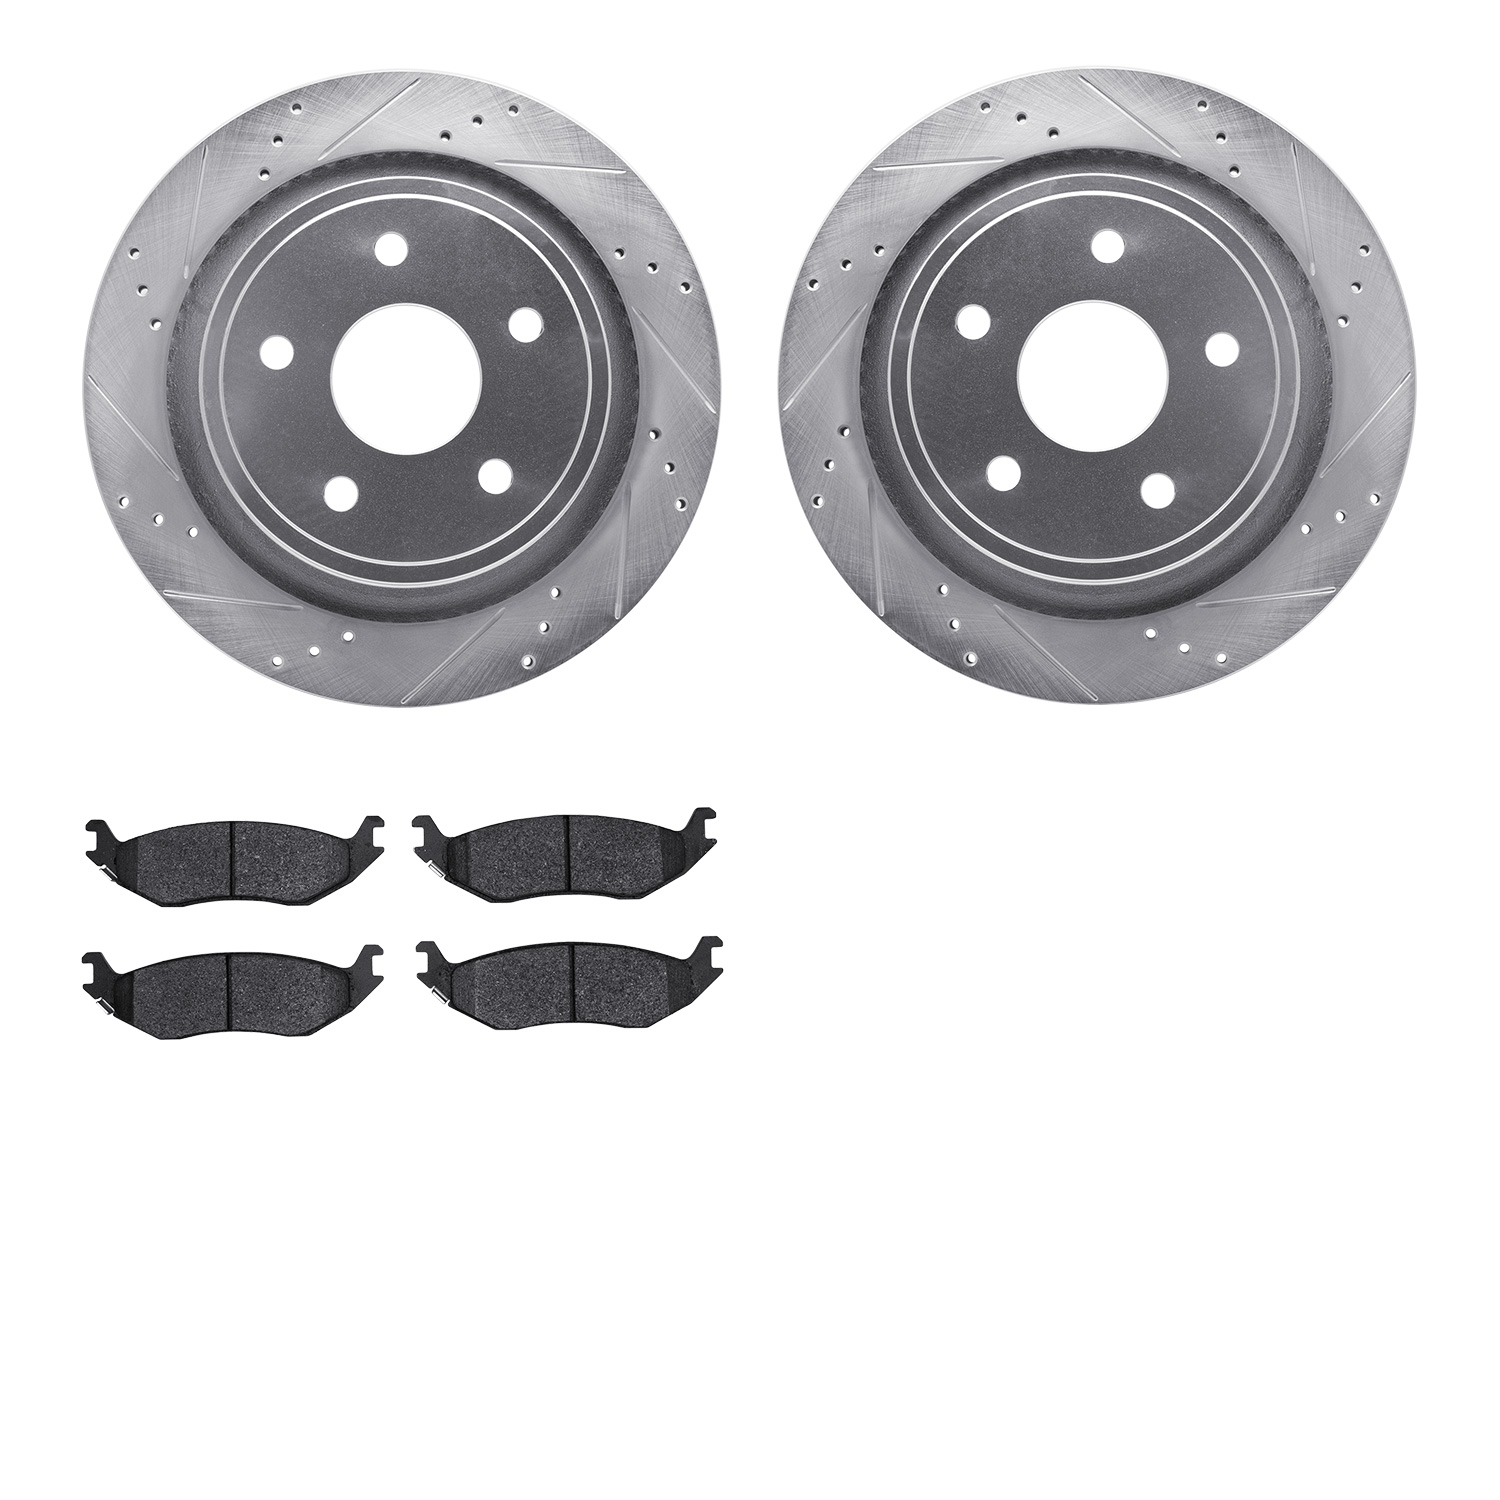 7402-40012 Drilled/Slotted Brake Rotors with Ultimate-Duty Brake Pads Kit [Silver], 2002-2018 Mopar, Position: Rear